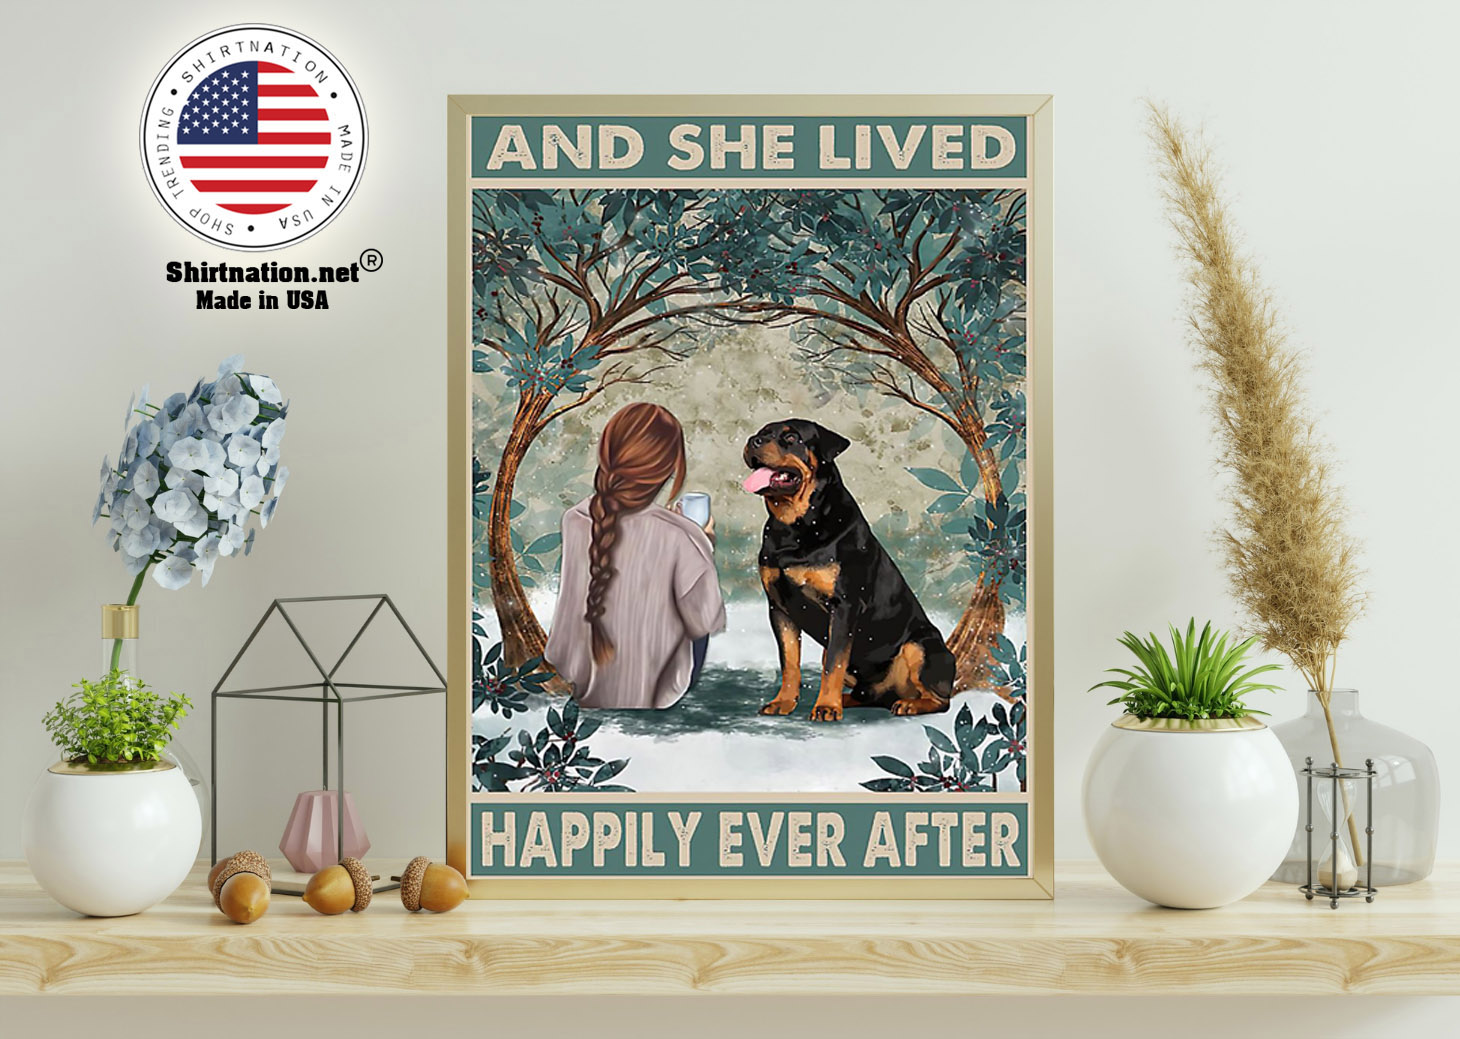 Rottweiler and she lived happily ever after poster